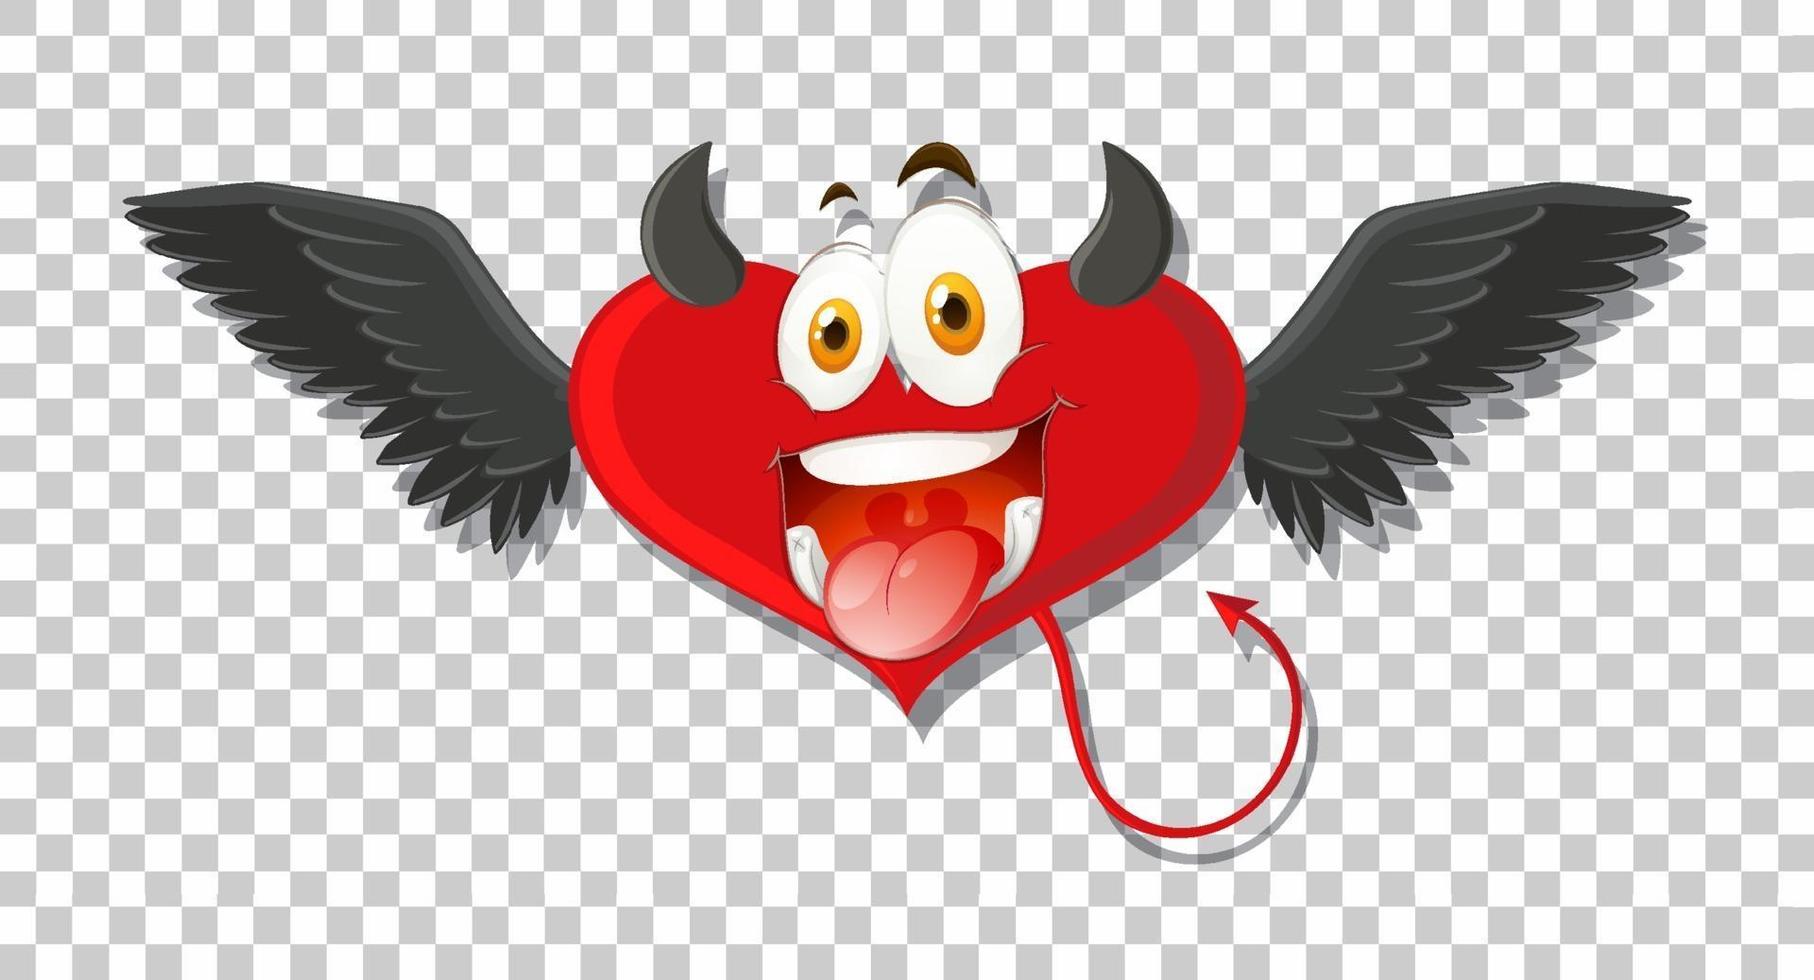 Heart shape devil with facial expression vector